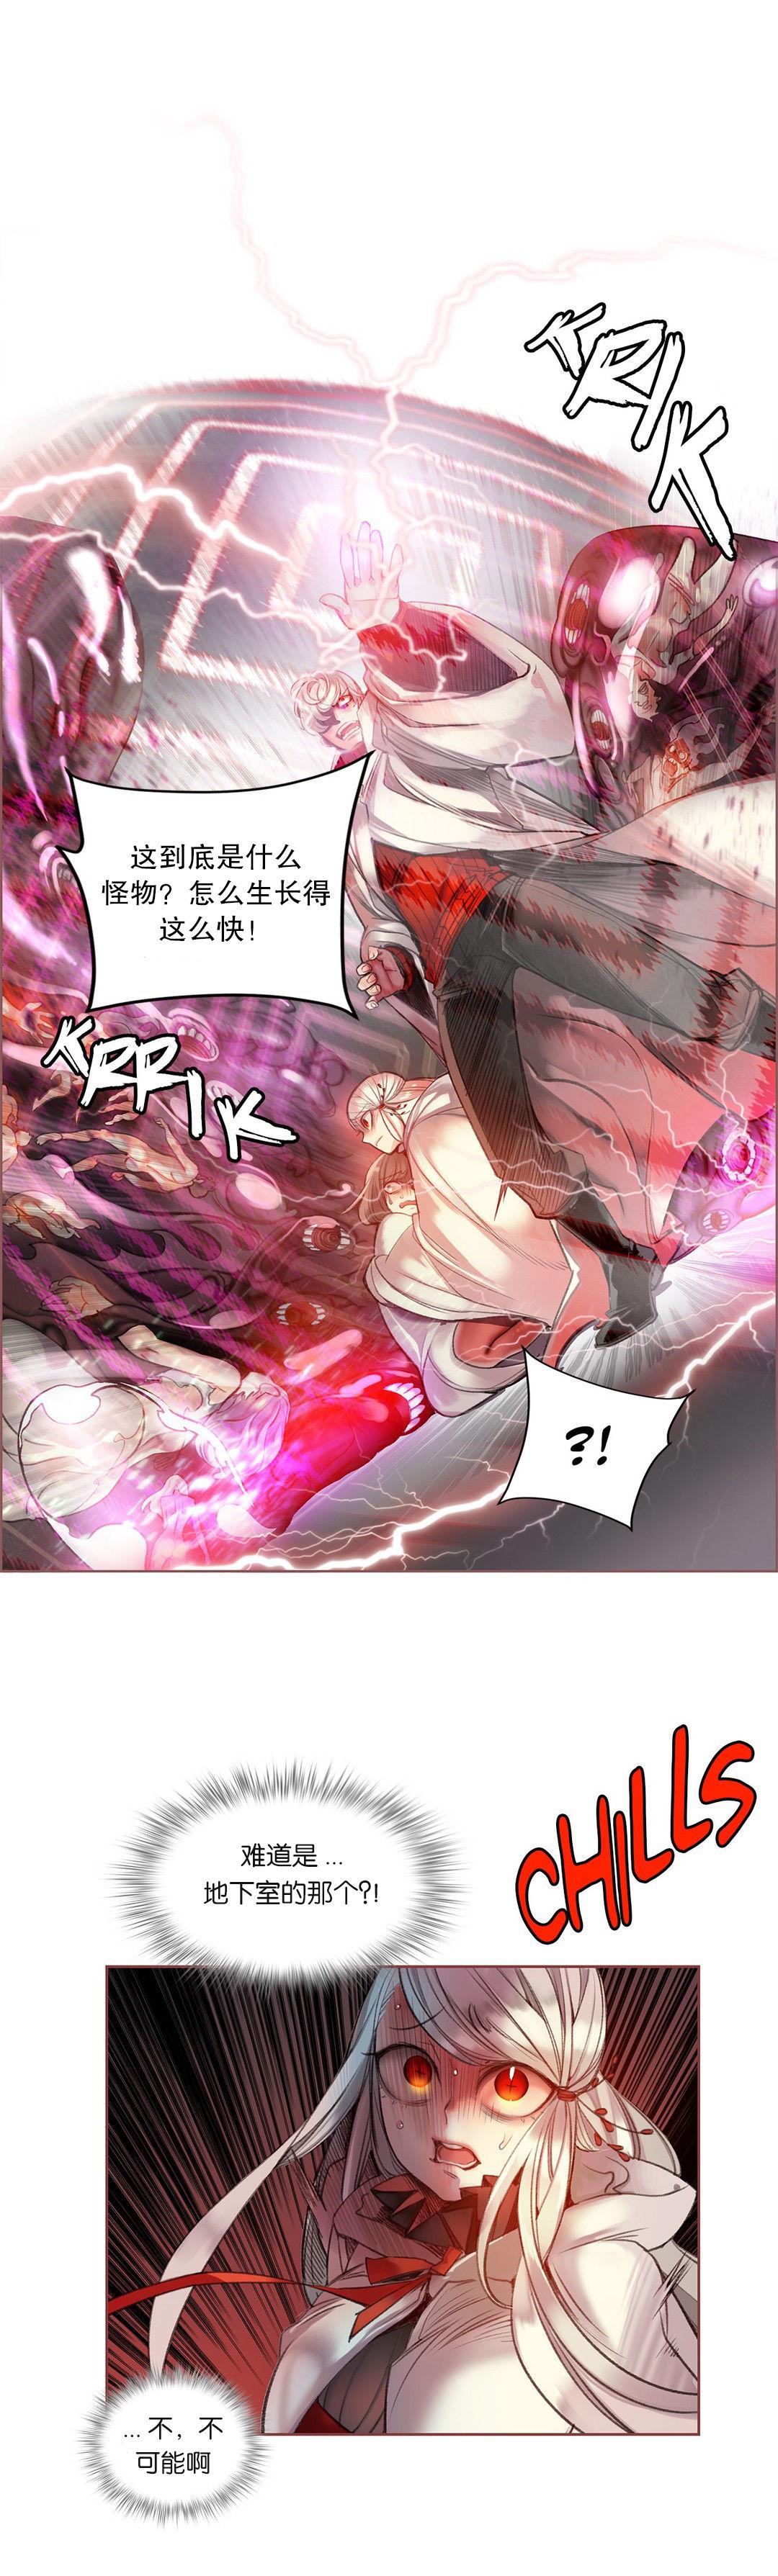 [Juder] Lilith`s Cord (第二季) Ch.61-64 [Chinese] [aaatwist个人汉化] [Ongoing] 20